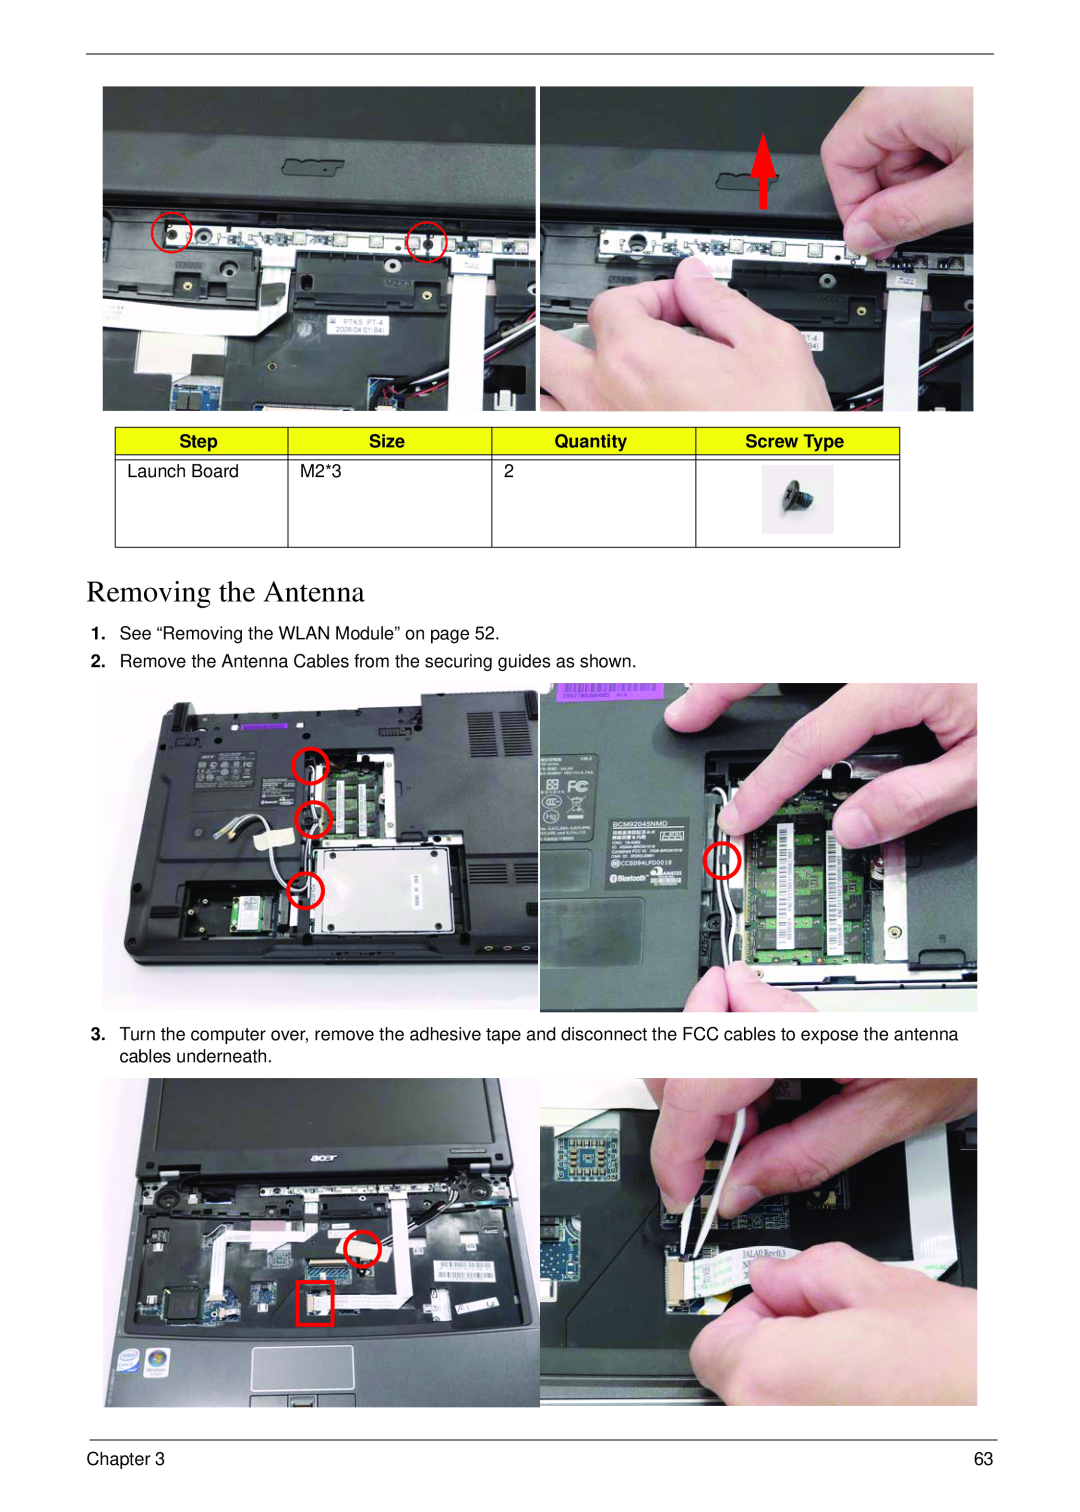 Acer 4730 manual Removing the Antenna, Step, Size, Quantity, Screw Type, Launch Board, M2*3 